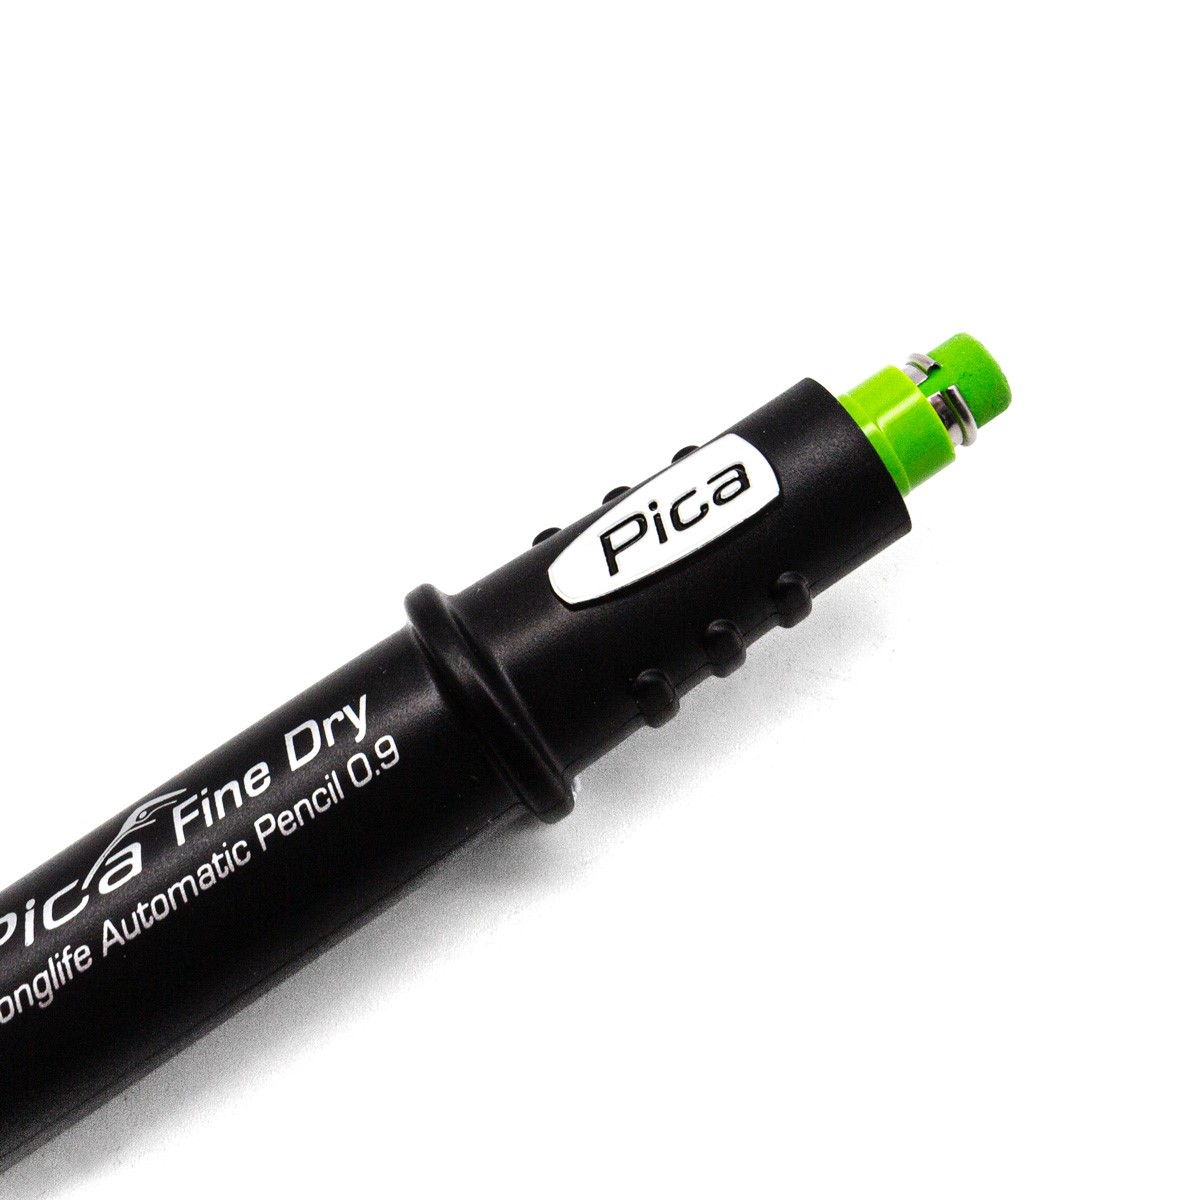 Pica - Fine Dry Eraser for Pica Dry - 5 Pack